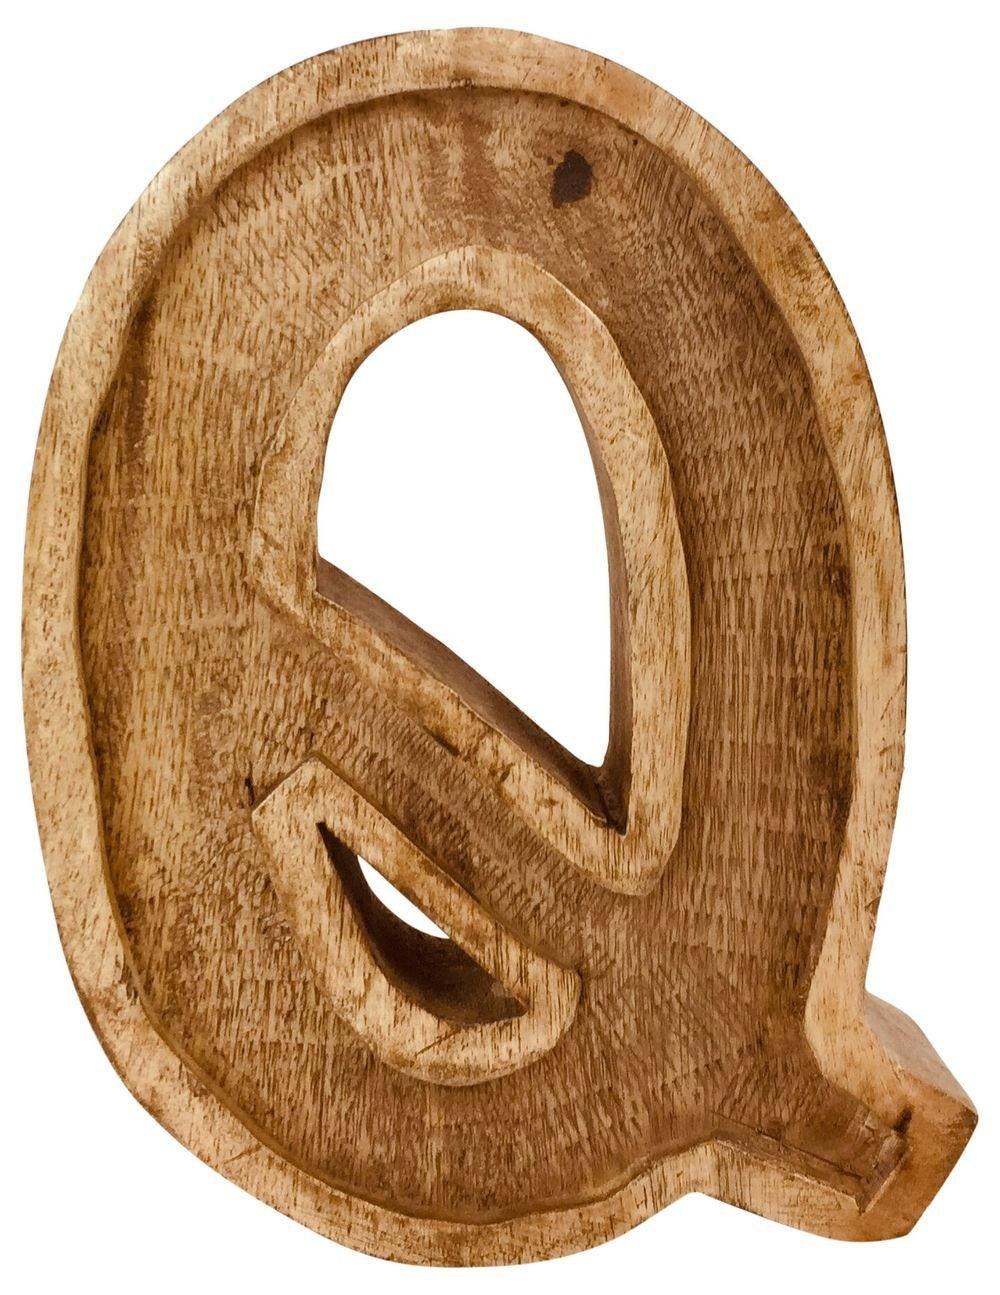 Hand Carved Wooden Embossed Letter Q